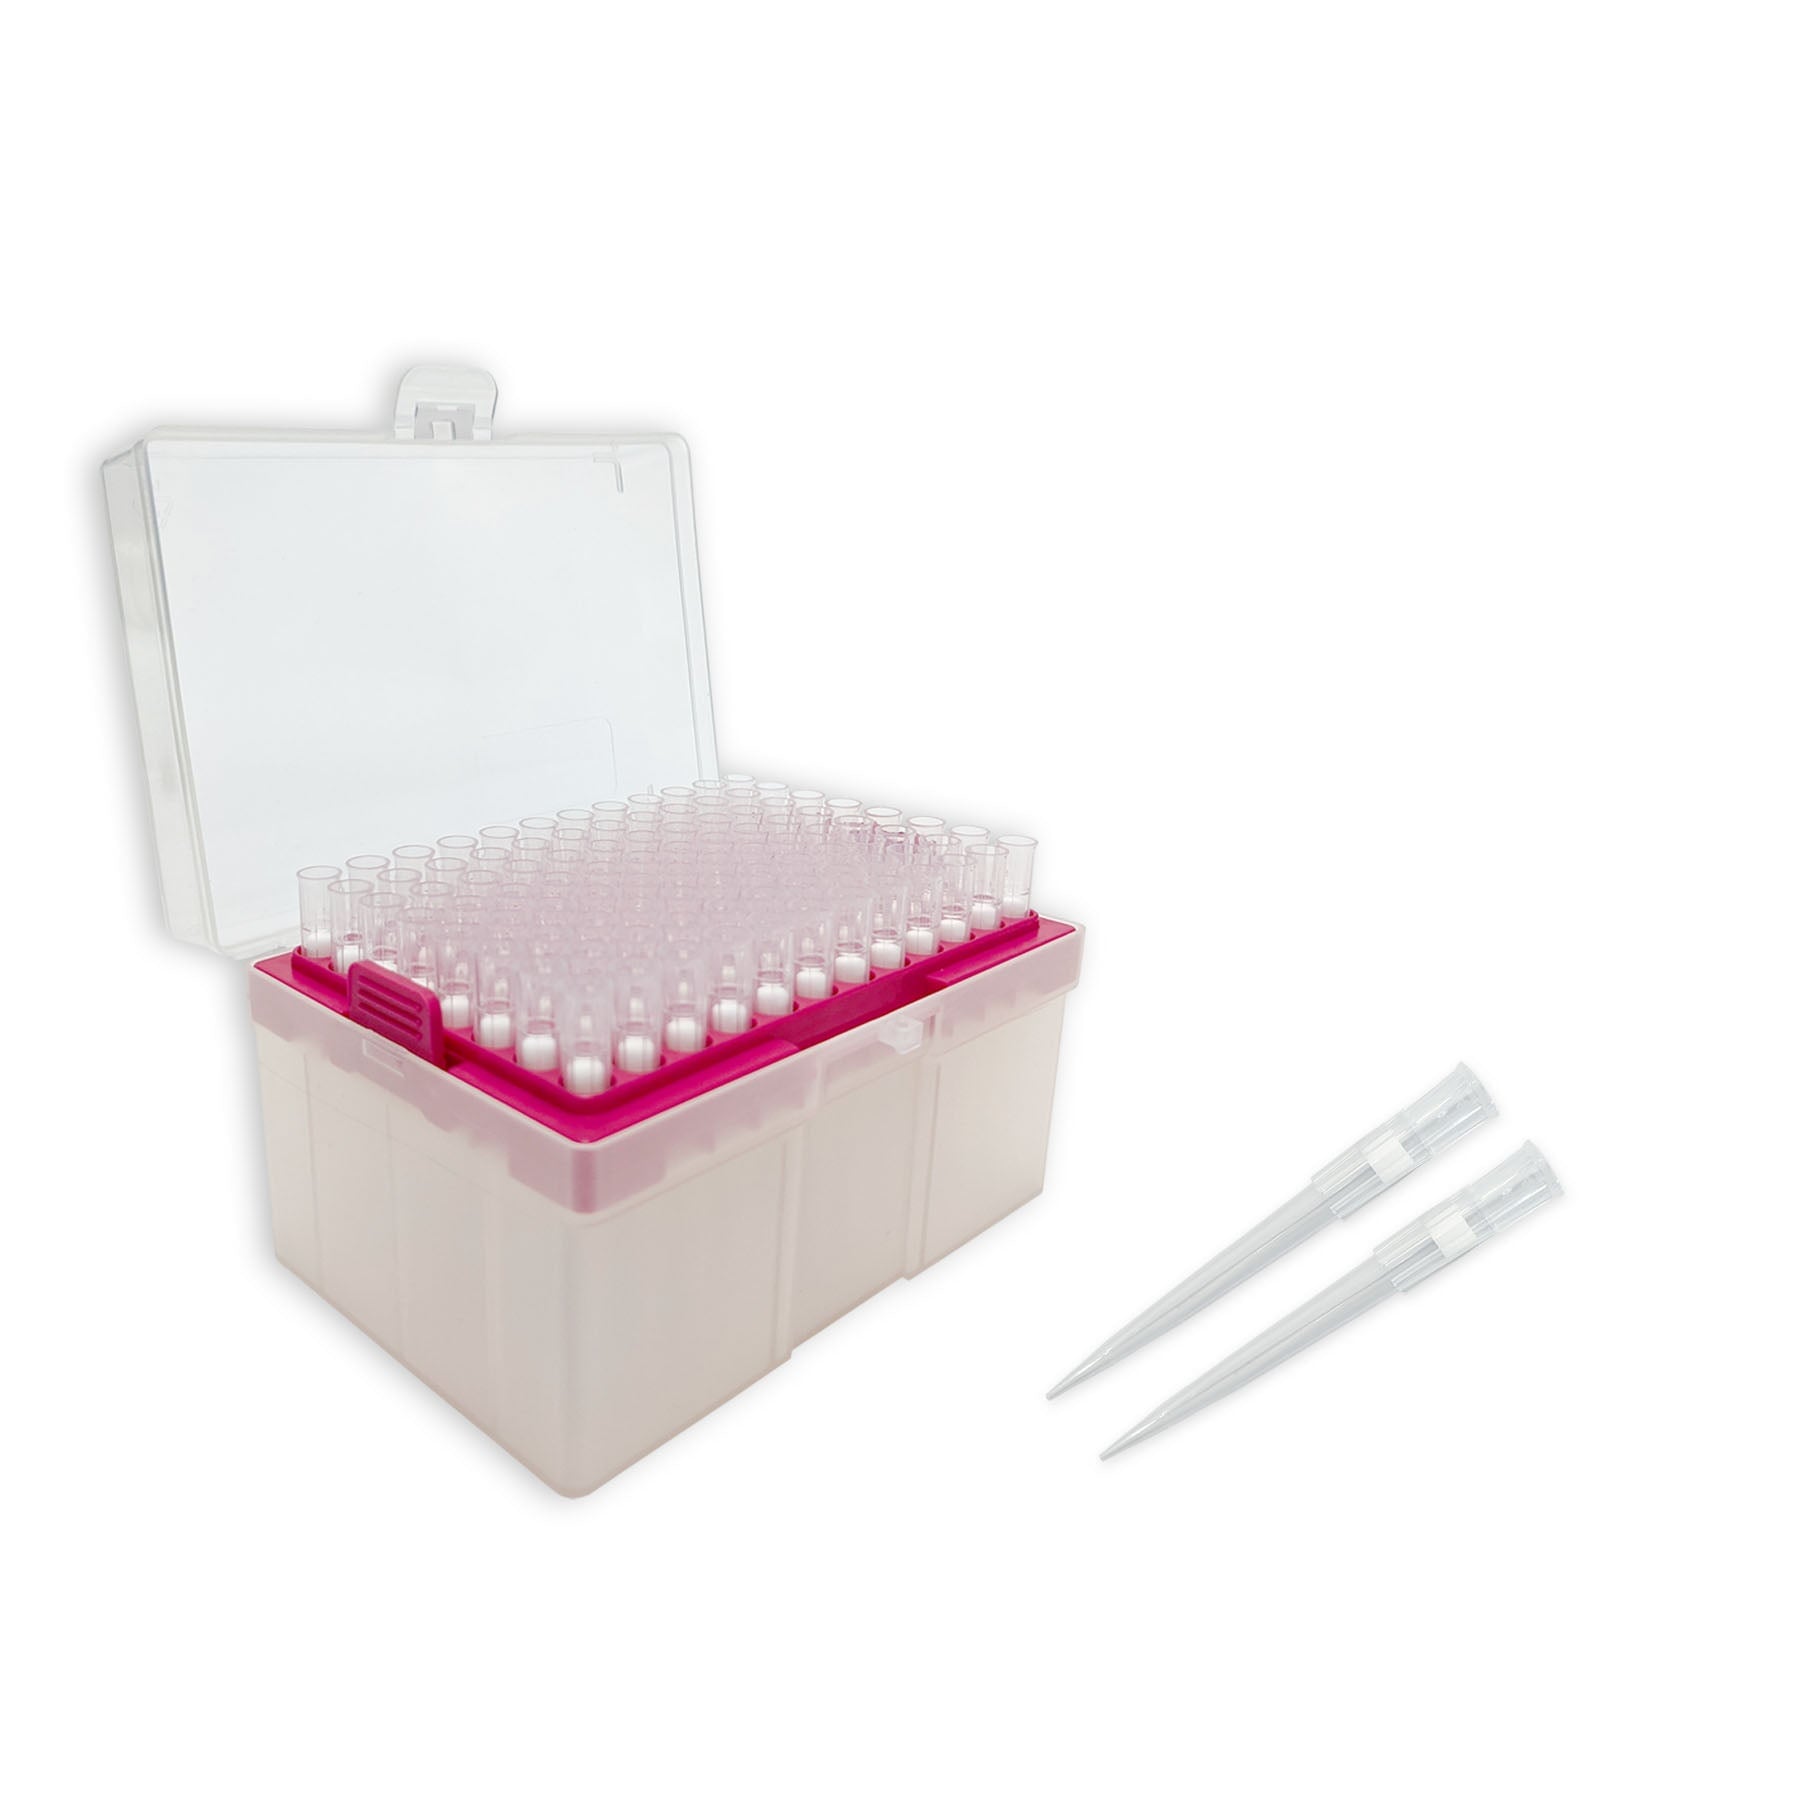 MTC Bio P4300-FT Pipette Tips, Filtered, 300µL capacity, sterile, for 200µL and 300µL pipettes, 10 racks of 96 tips